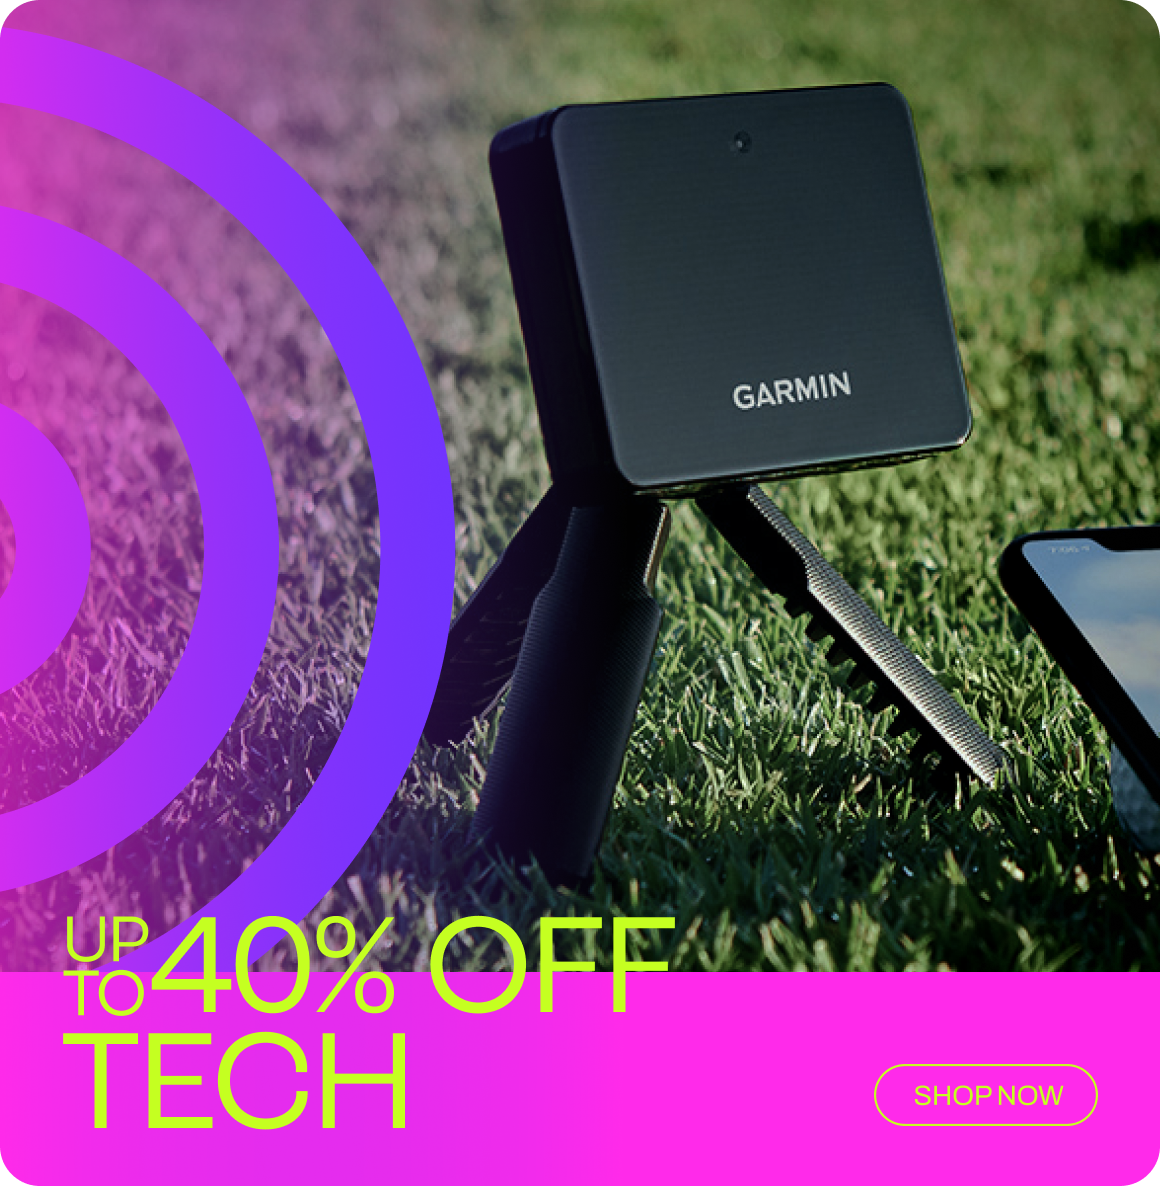 Up to 40% Off Tech